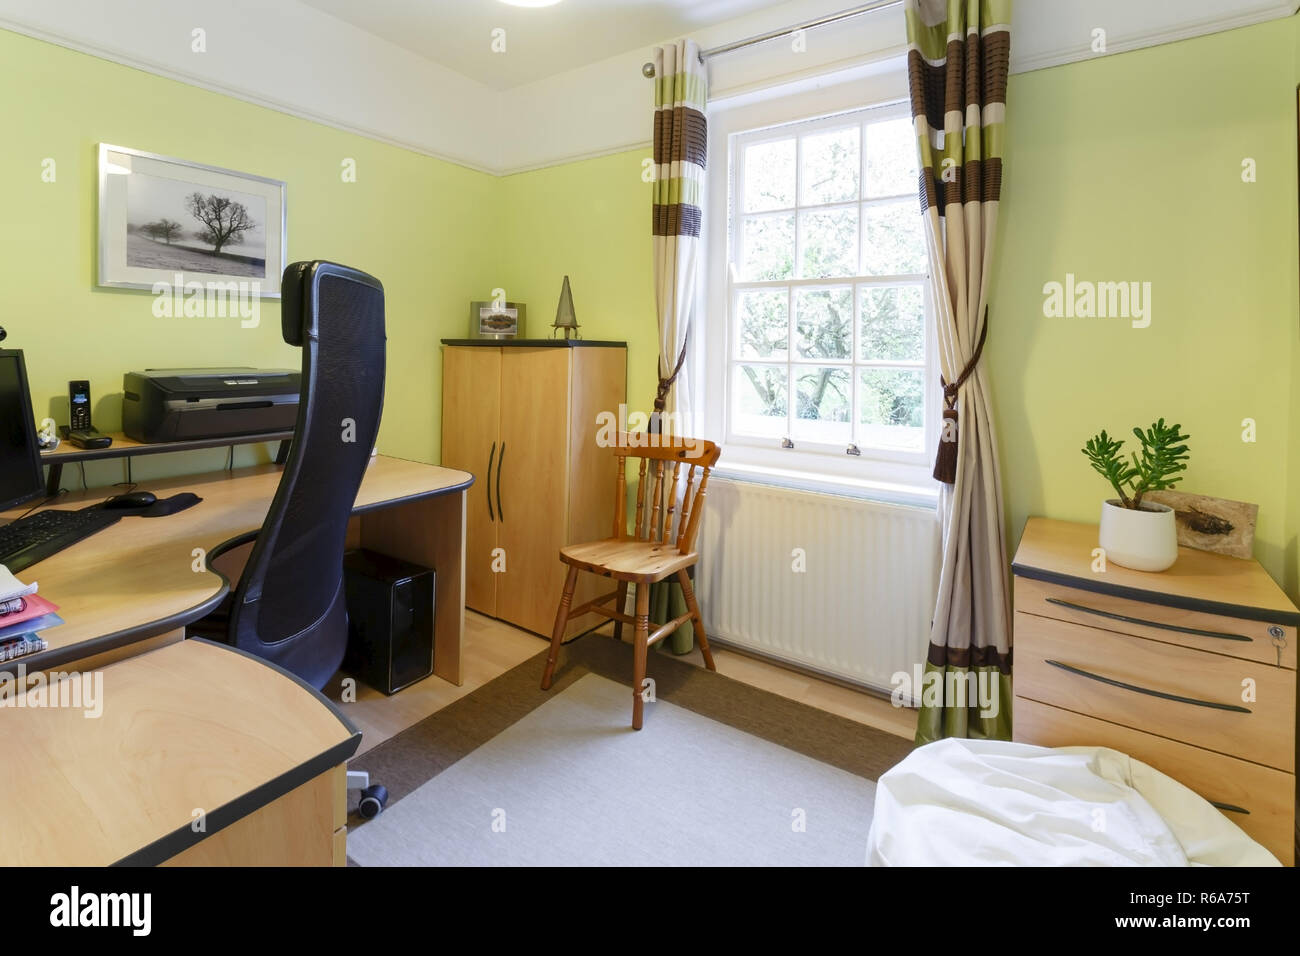 Home office or study interior with modern decor Stock Photo